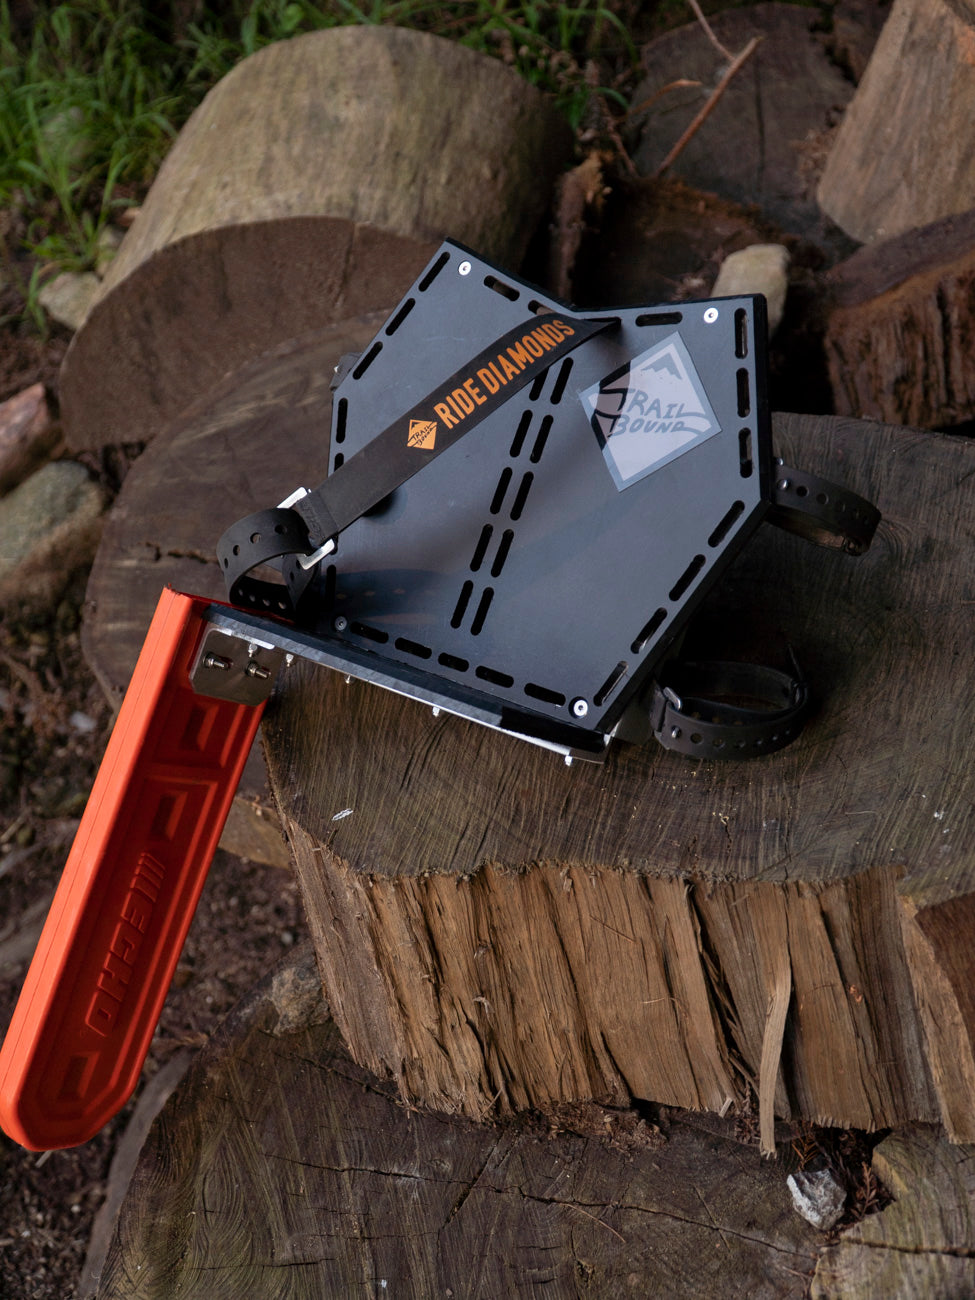 Trailcutters Chainsaw Number Plate Rack